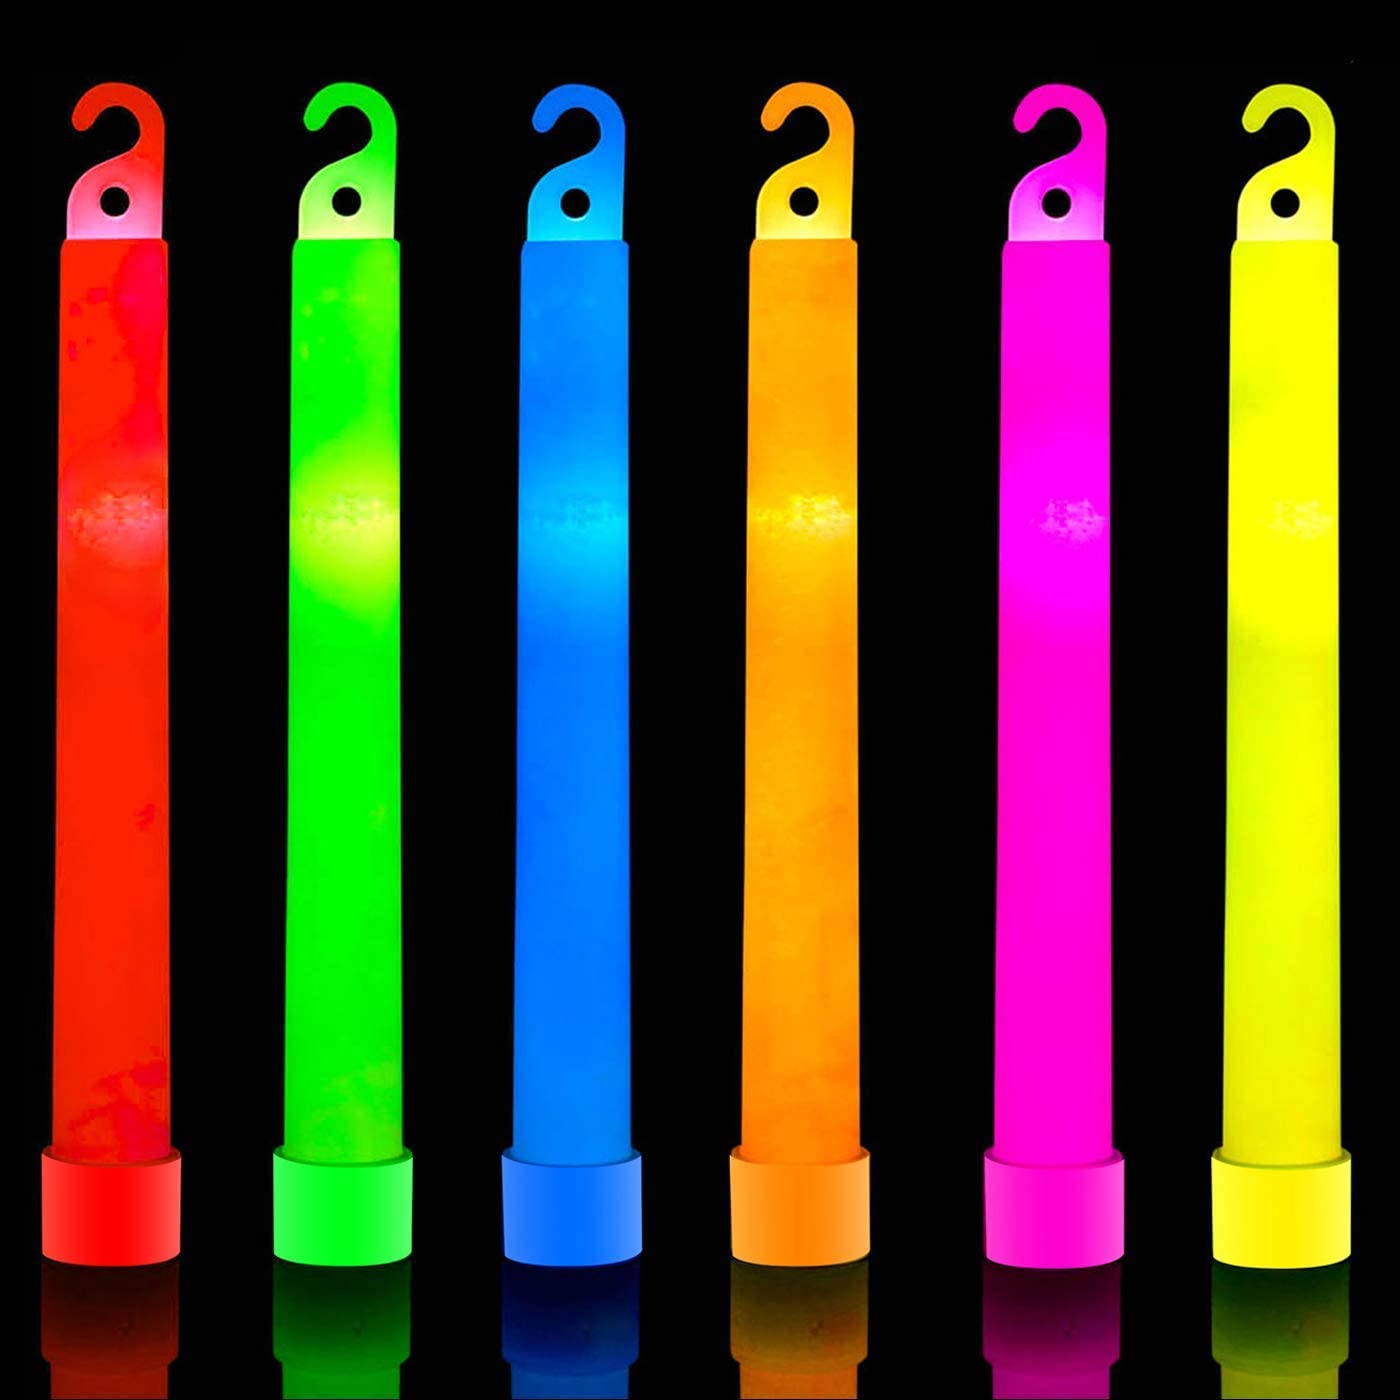 32 Ultra Bright 6 Inch Glow Sticks – Emergency Bright Chem Glow Sticks with 12 Hour Duration – Camping, Hiking Glow Stick Lights – for Parties and Kids Activities – Blackout Or Storm Ready Use